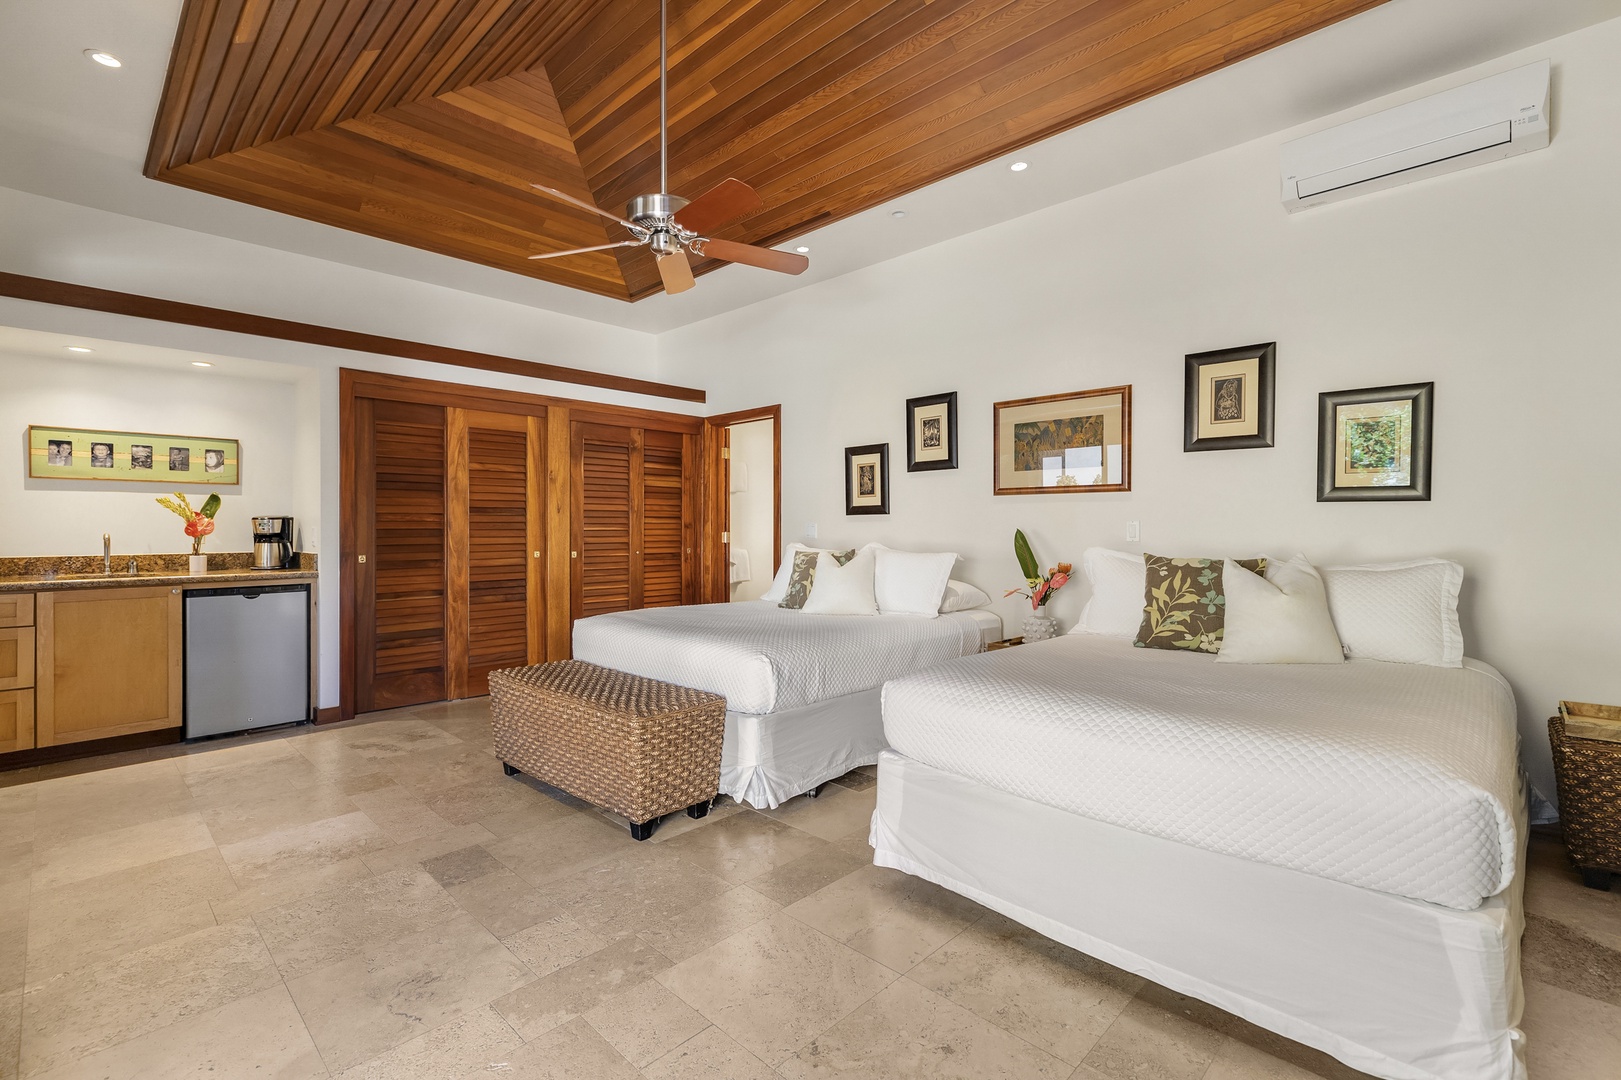 Honolulu Vacation Rentals, Hale Makai at Diamond Head - Guest House has separate courtyard entrance and is furnished with 2 Queen Beds, Wet-Bar, Smart TV, and Pool Access